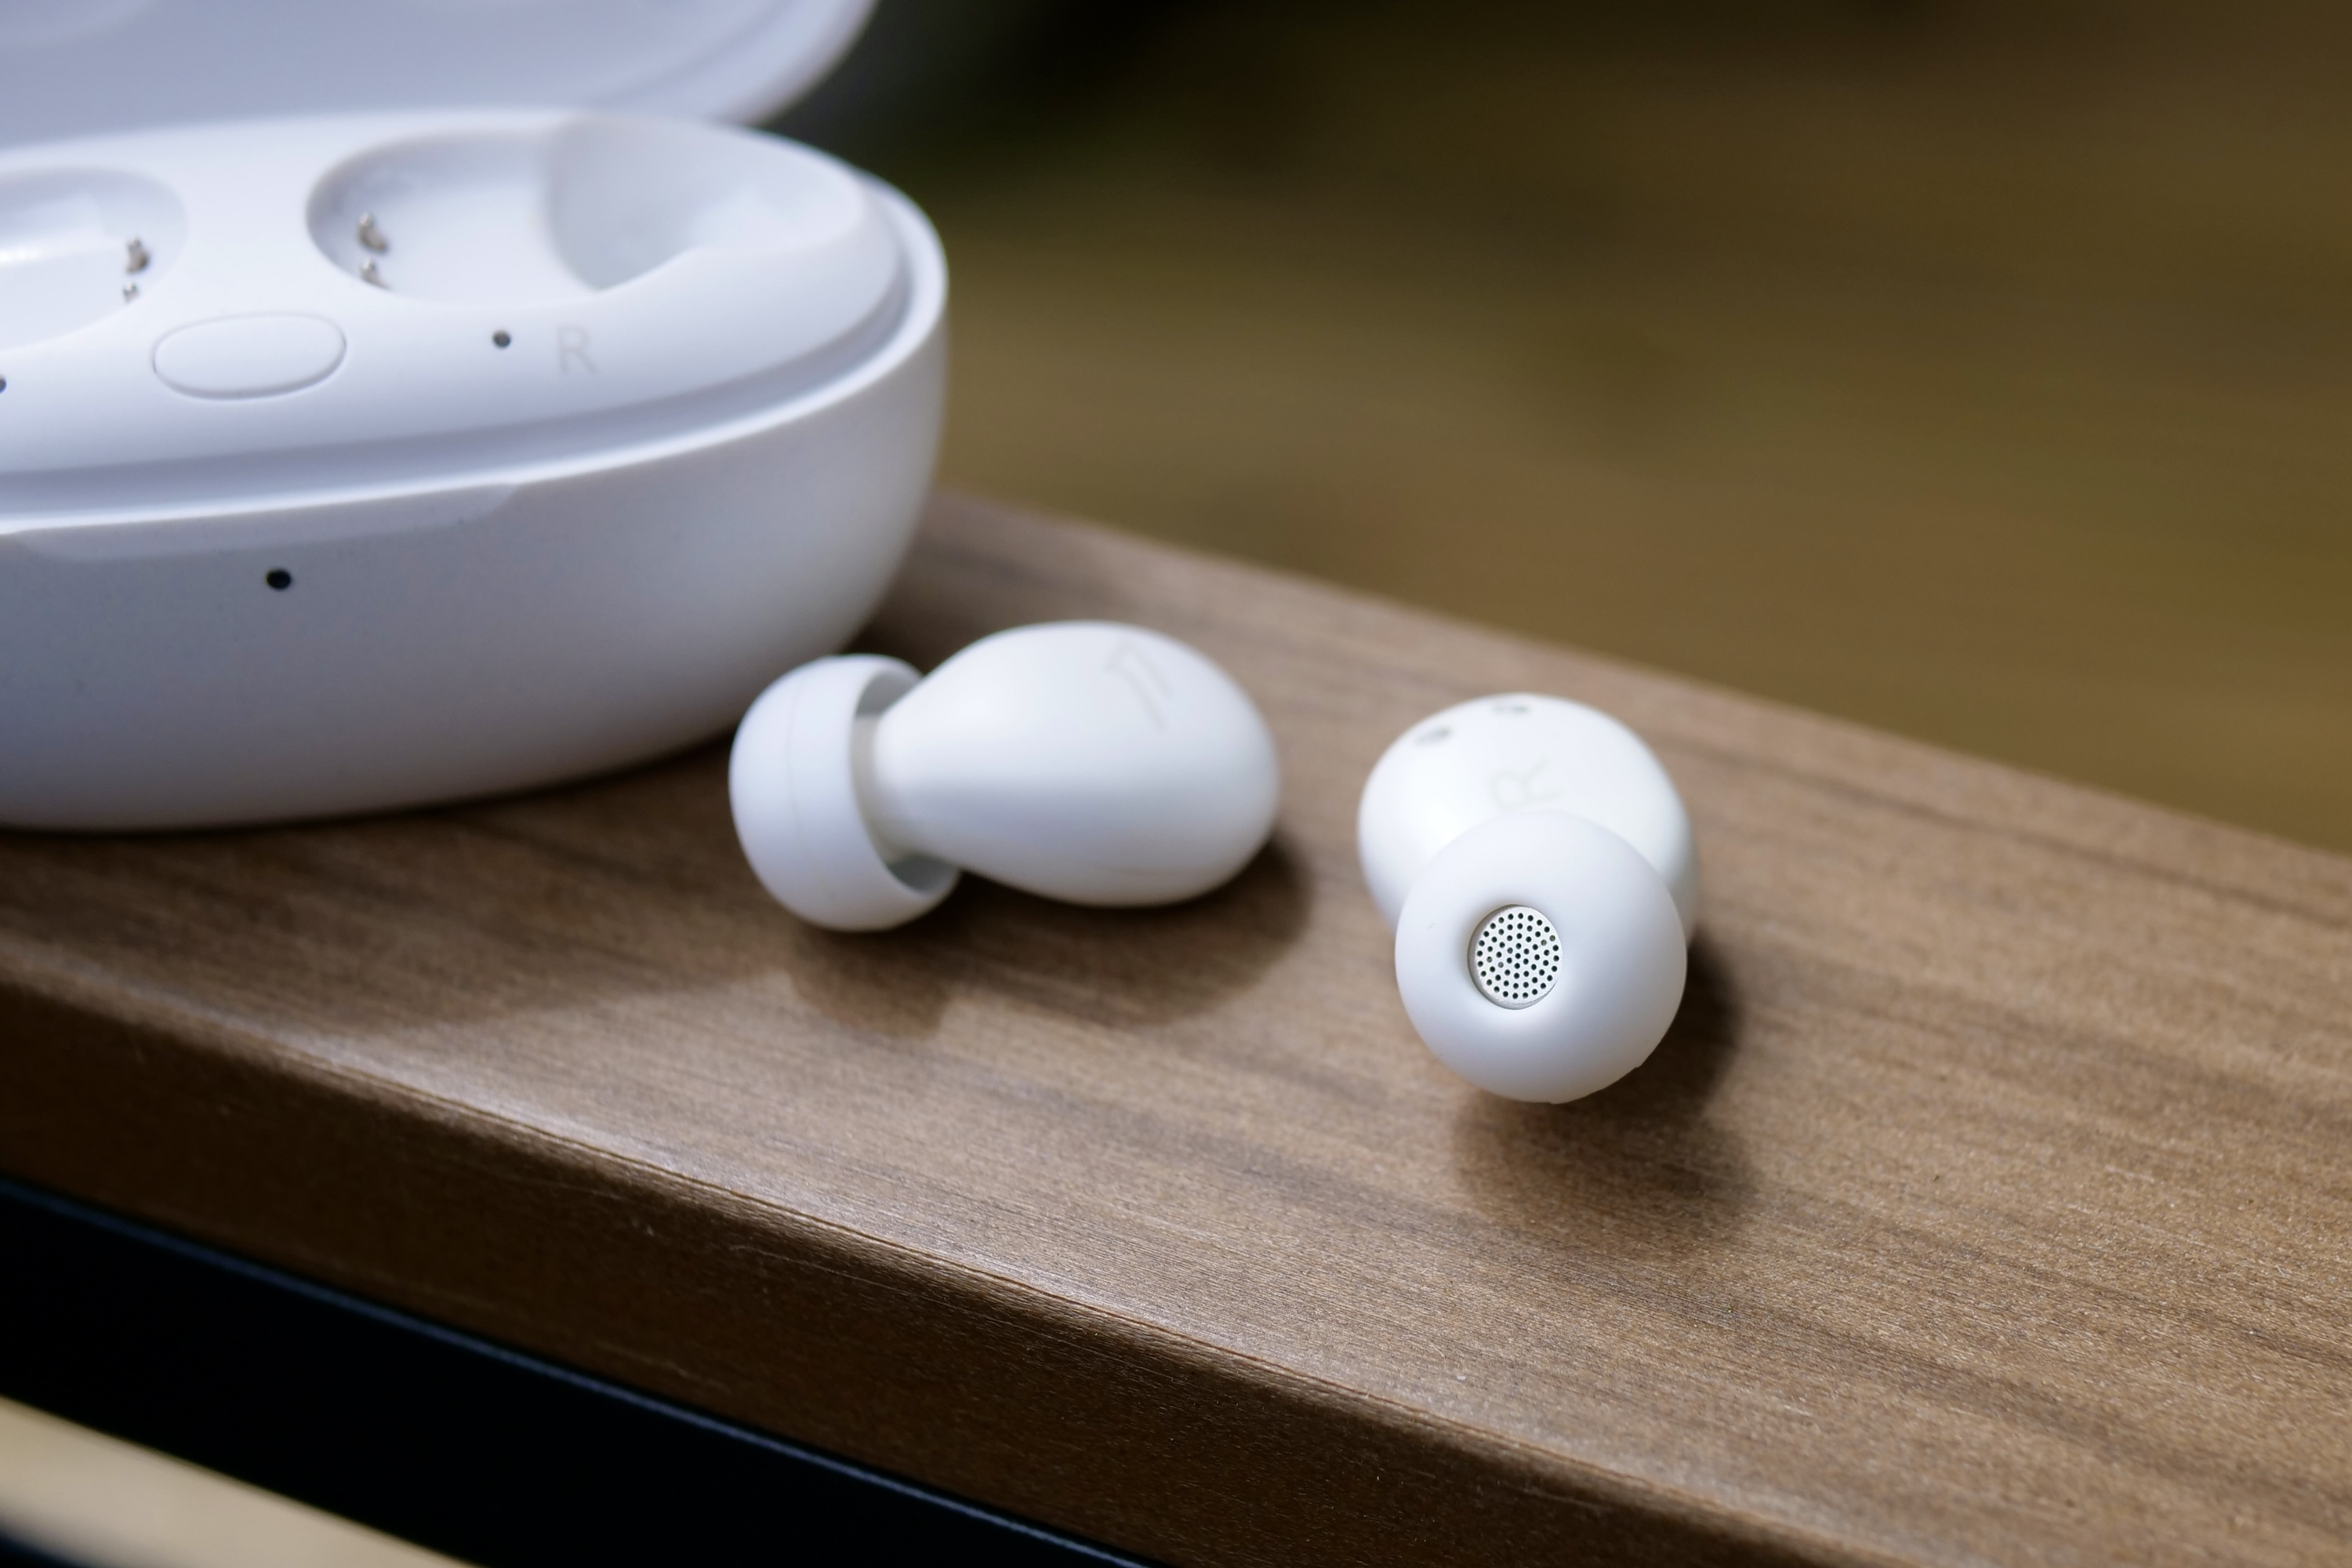 The 1More Z30 Sleeping Earbuds seen from the front.